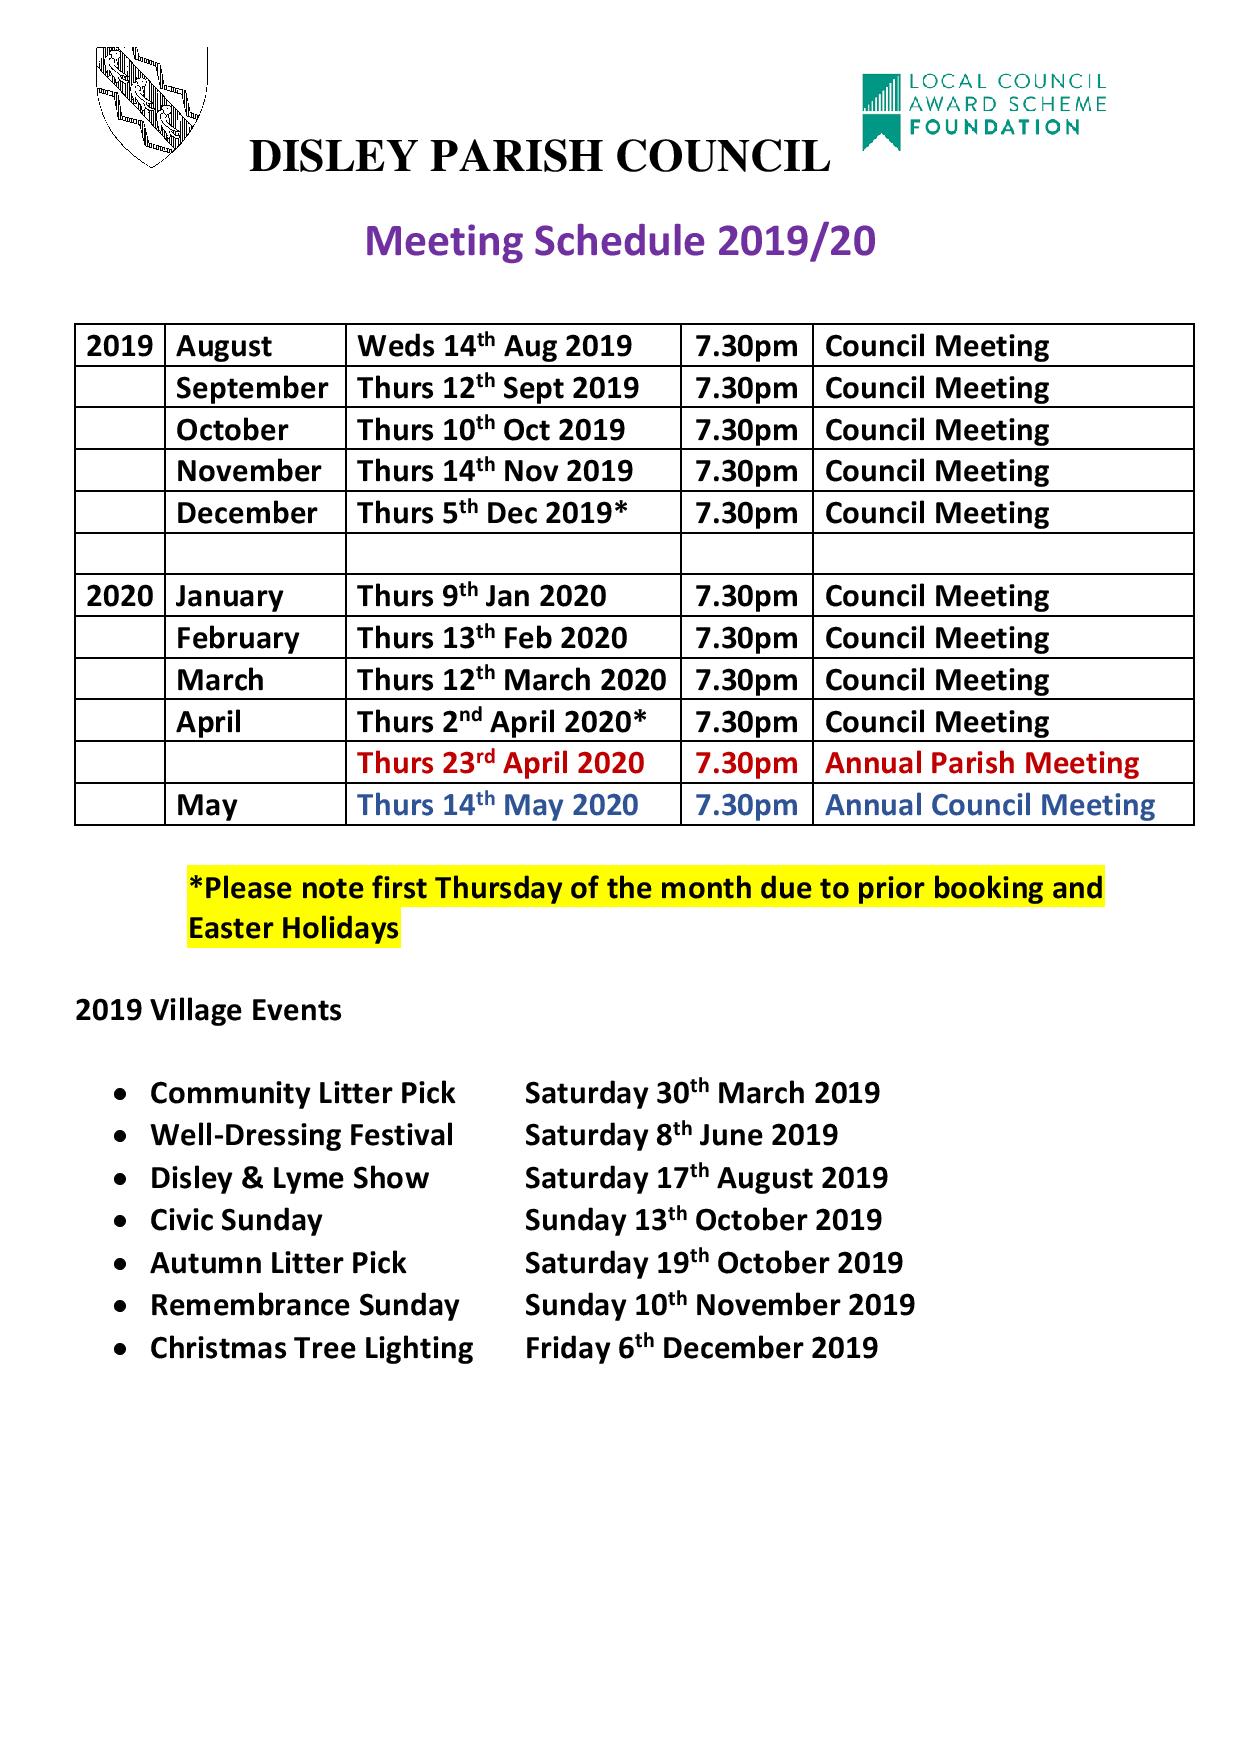 Meetings Schedule 2019-2020 – Public Version – V2-page-001 – Disley